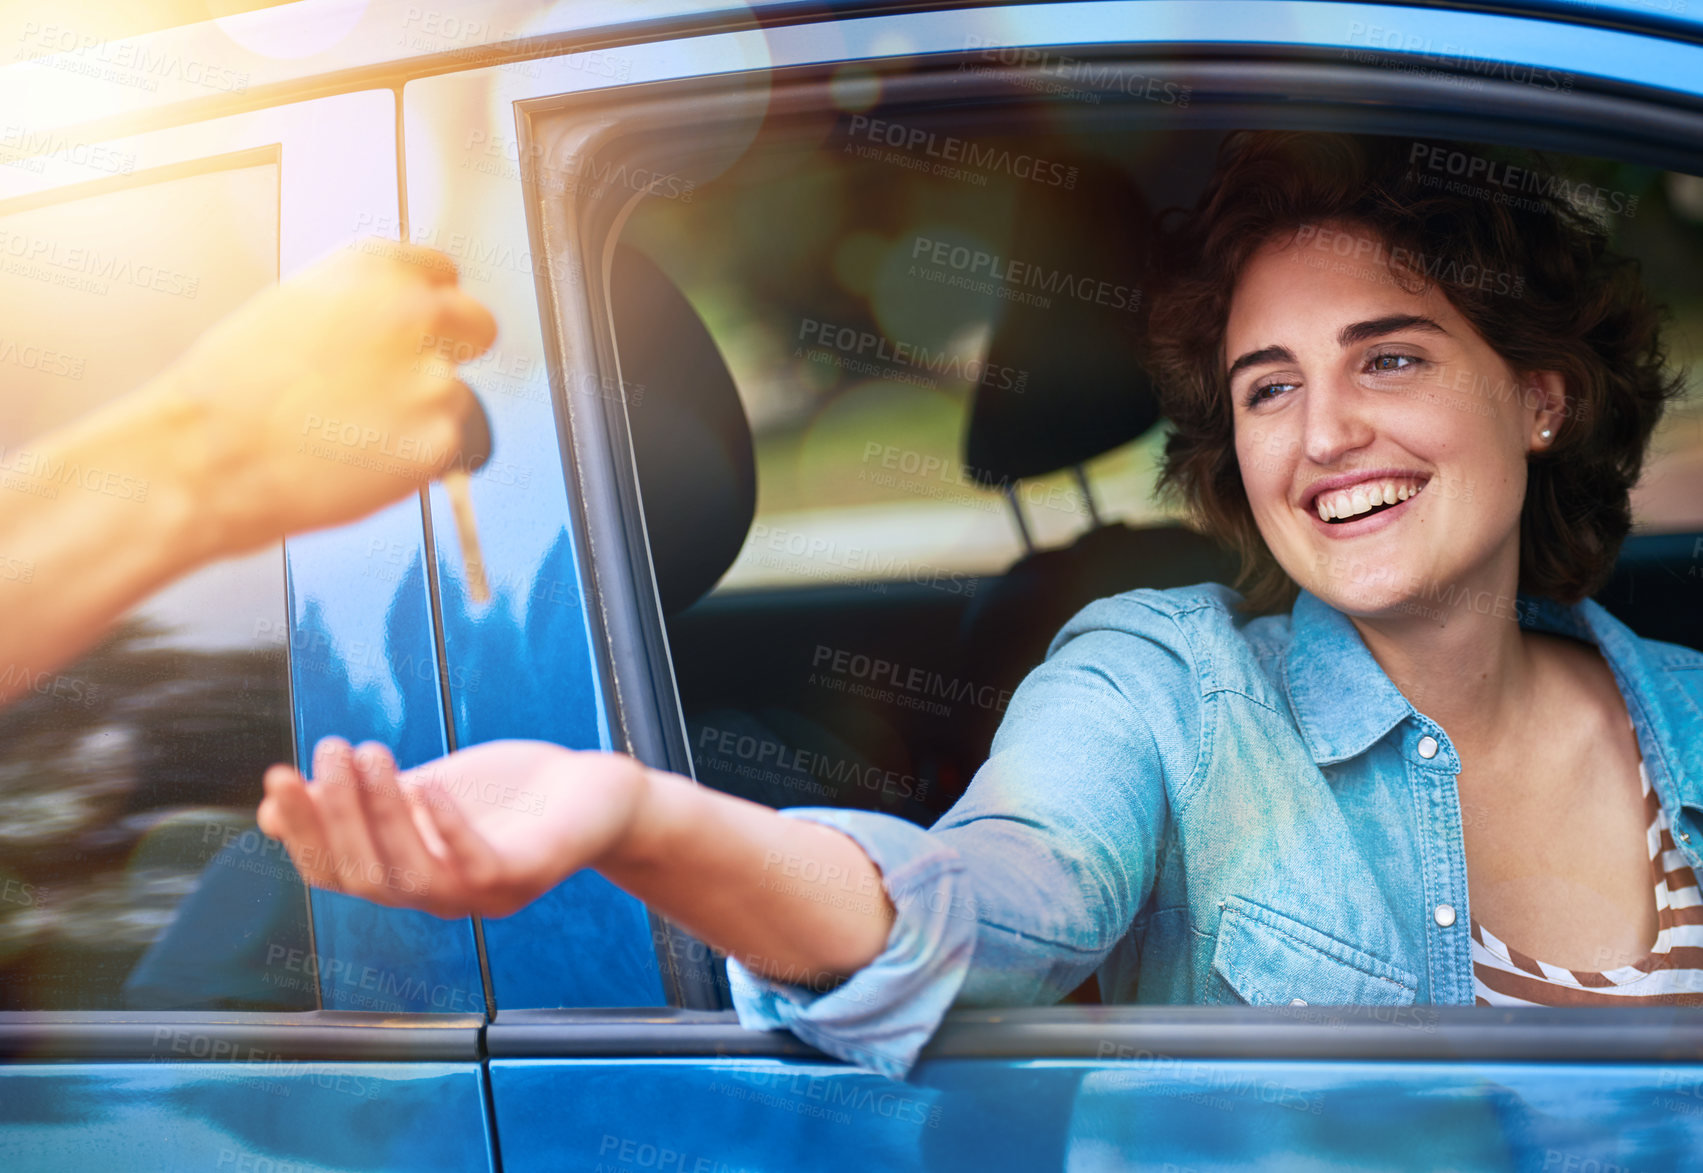 Buy stock photo Cropped shot of a man handing a young woman the keys to her new car